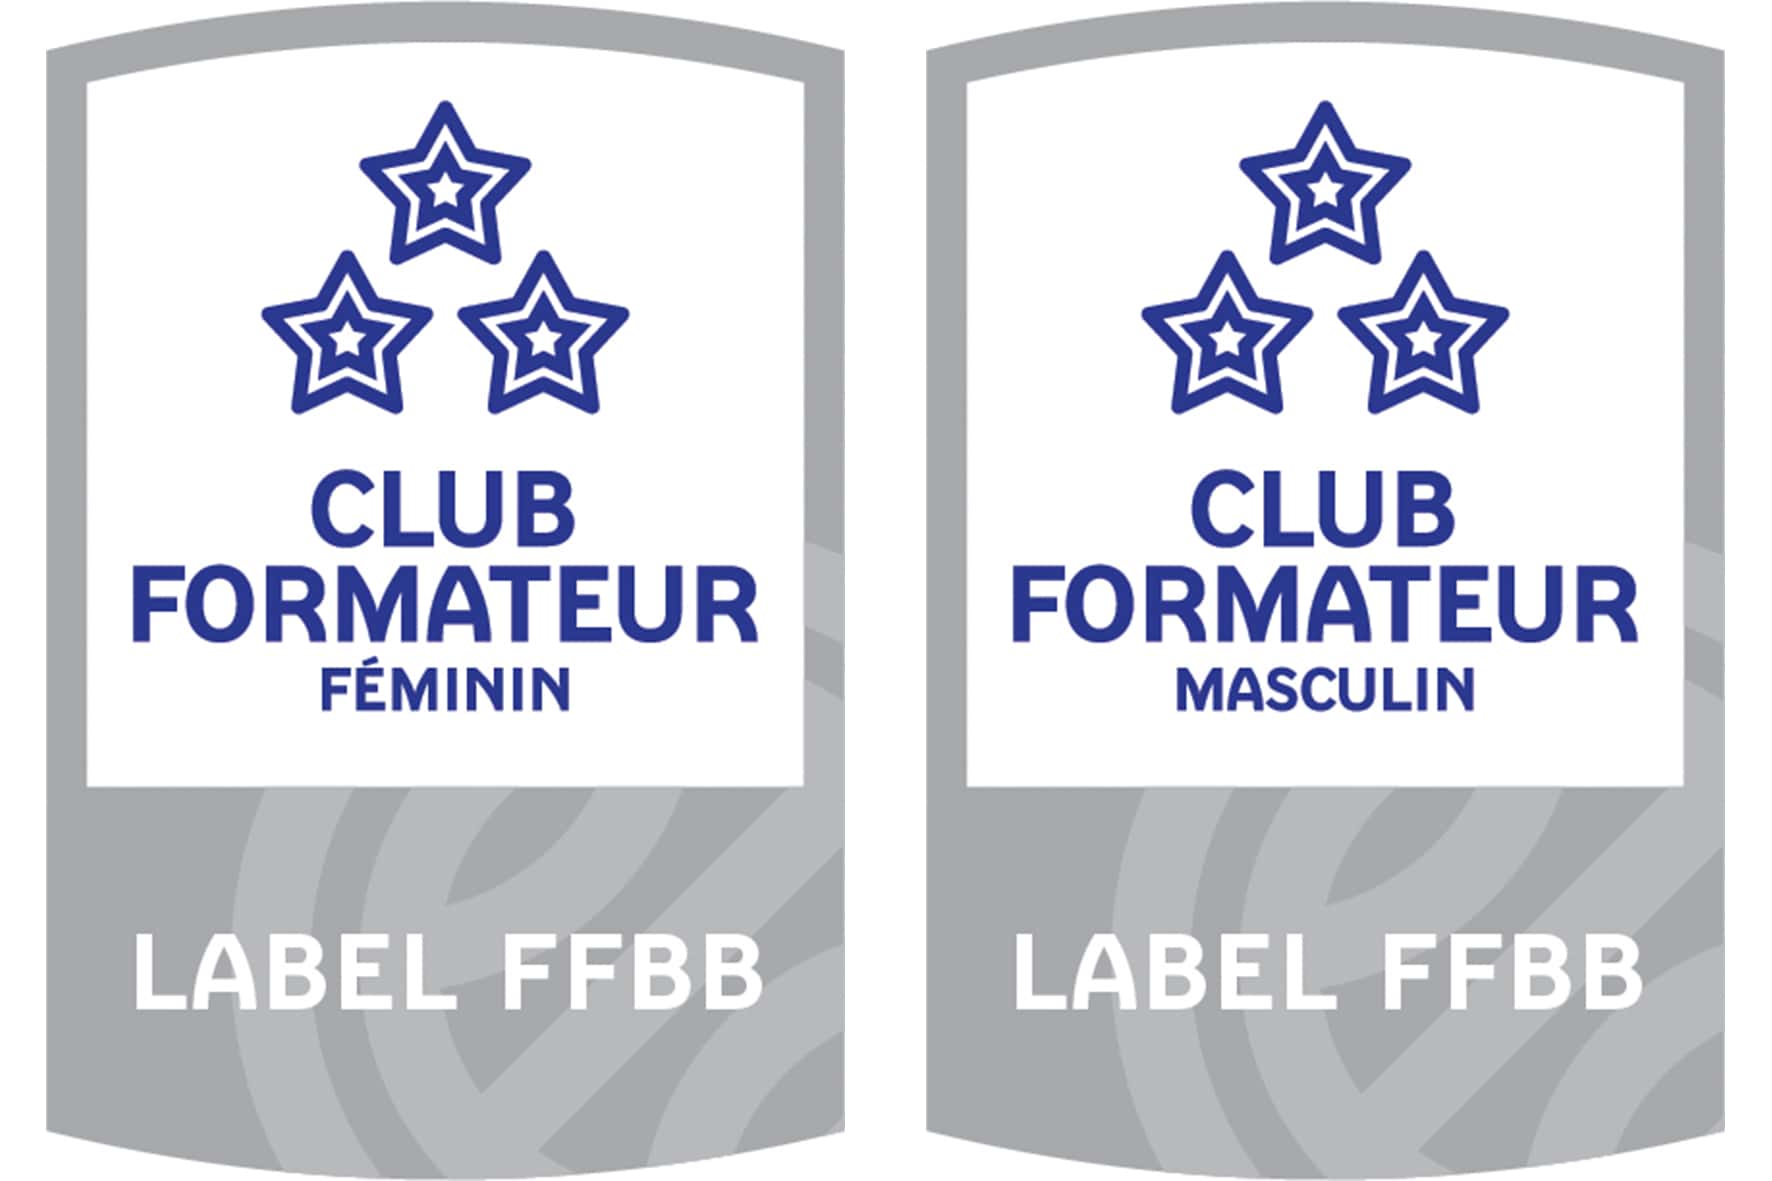 You are currently viewing Club Formateur féminin 3 étoiles et Club Formateur masculin 3 étoiles